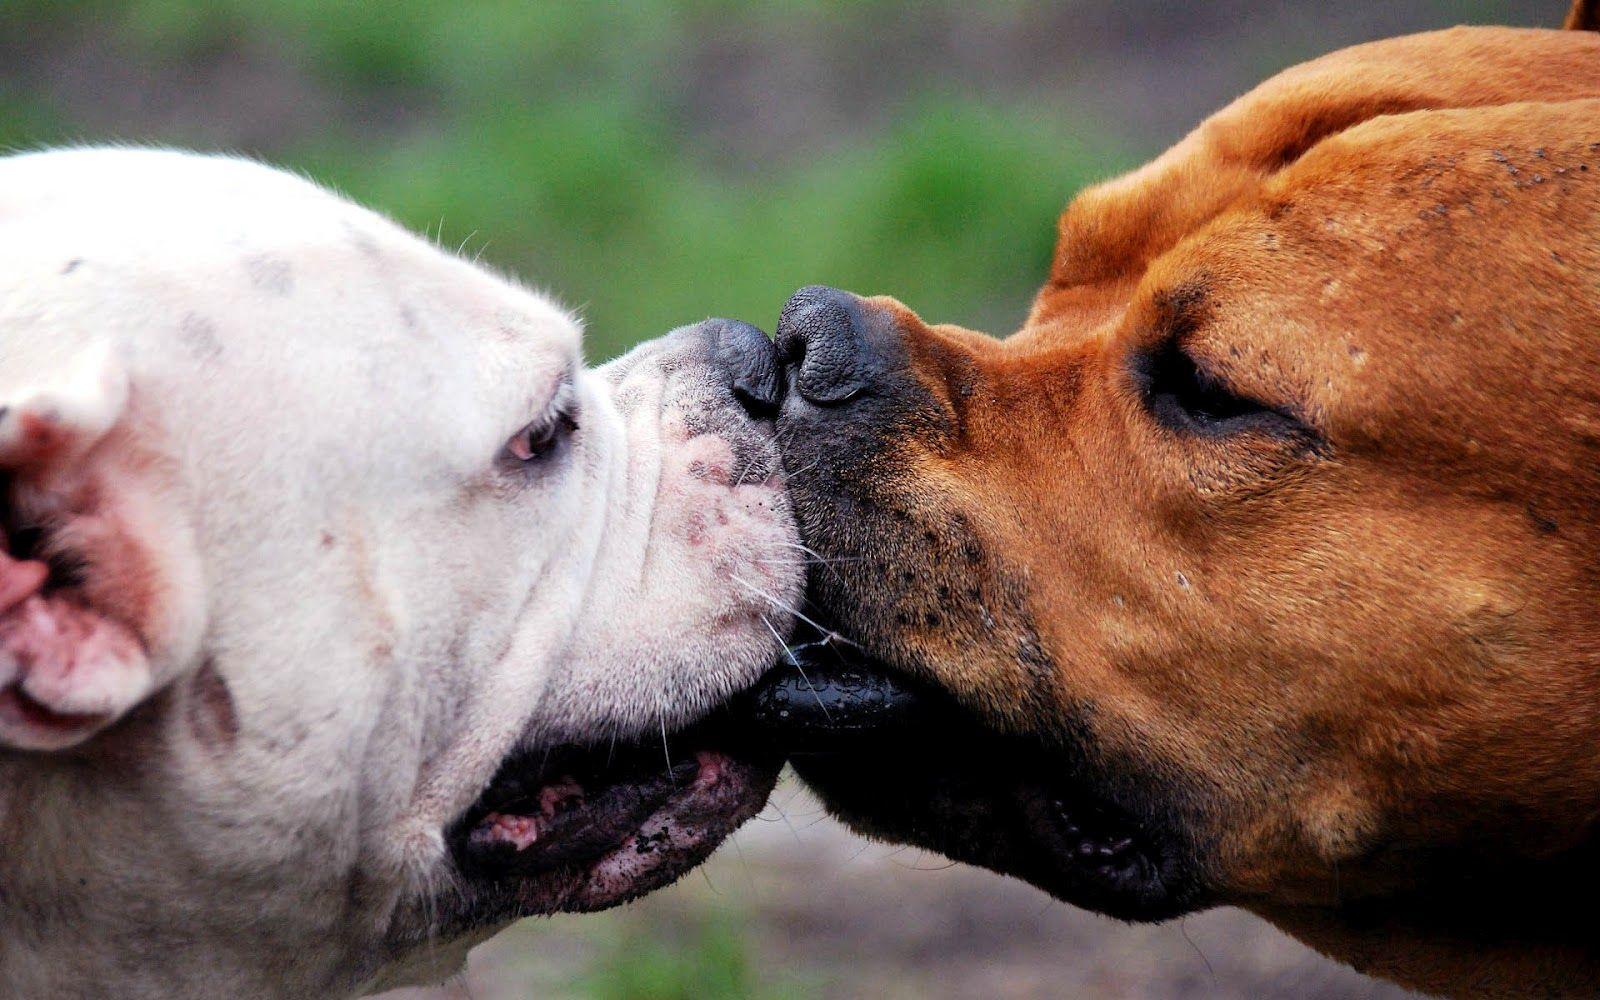 Two dogs kissing. Animals kissing, Funny dog videos, Funny